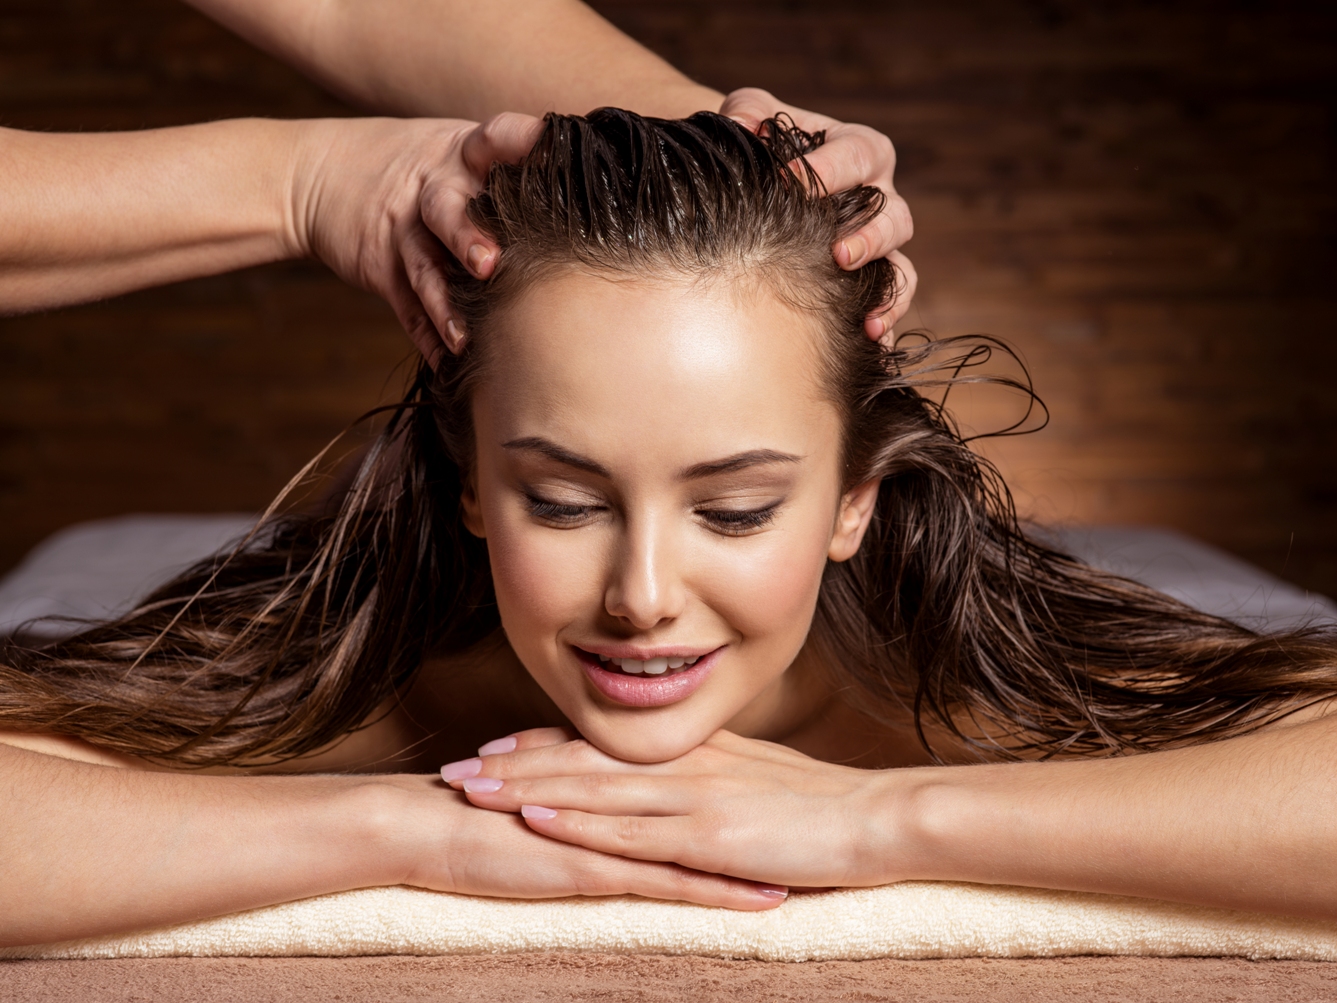 Masseur doing massage the head and hair for an woman in spa salon